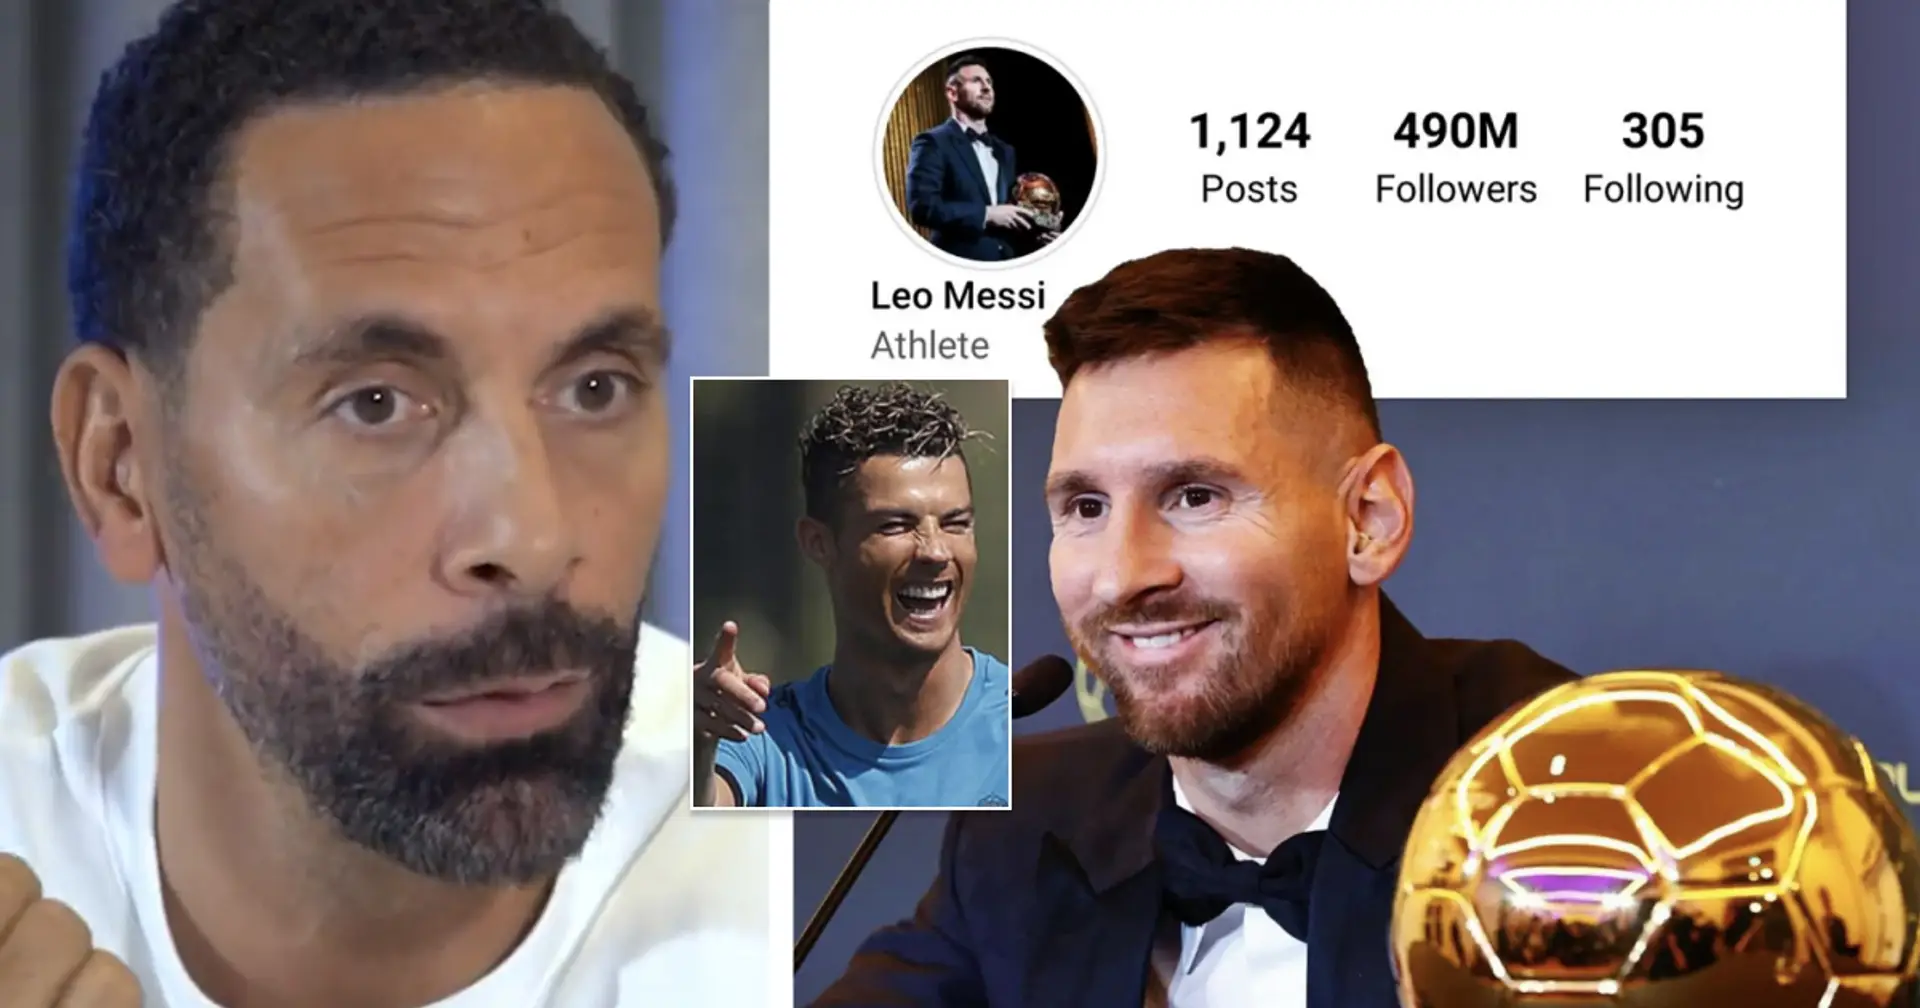 Rio Ferdinand claims Messi unfollowed teammate on Instagram because of Cristiano Ronaldo